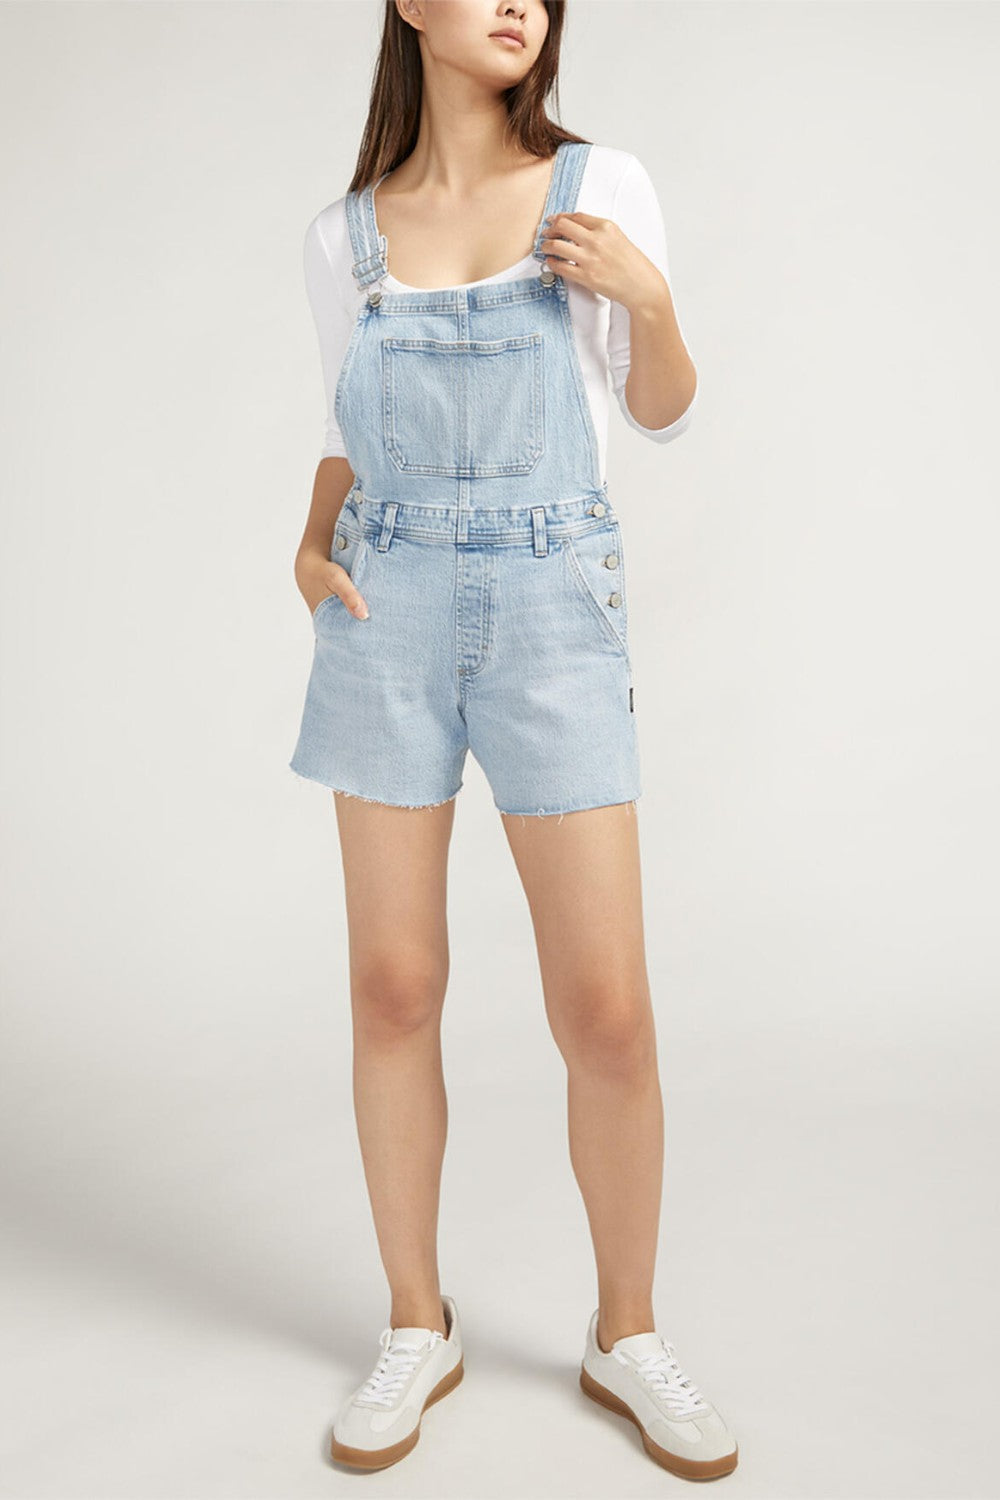 Get into a 70's vibe in a comfortably fitted shortall with vintage-inspired details and light distressing. A light indigo wash sets the perfect tone for spring, adjustable shoulder straps and an open back makes it easy to pair with your favourite tees.